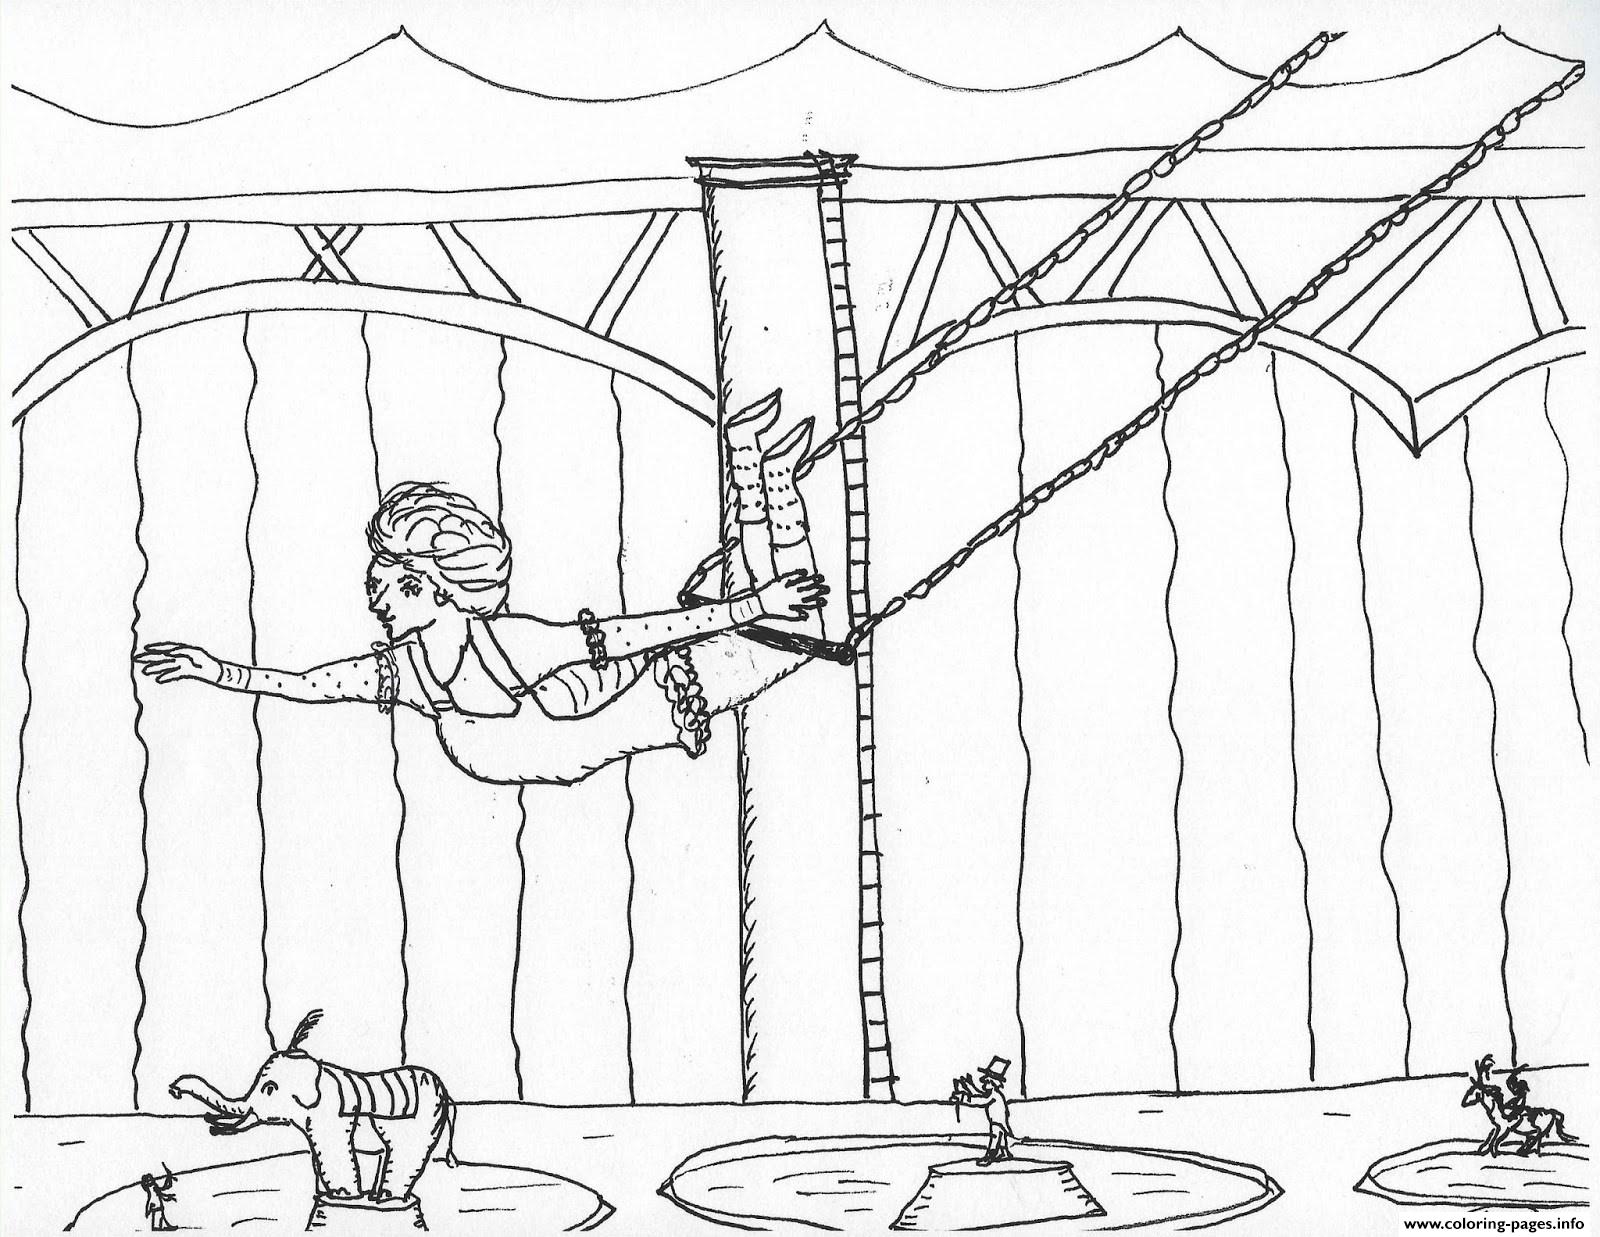 Greatest Showman Coloring Pages - The Greatest Showman Anne Wheeler